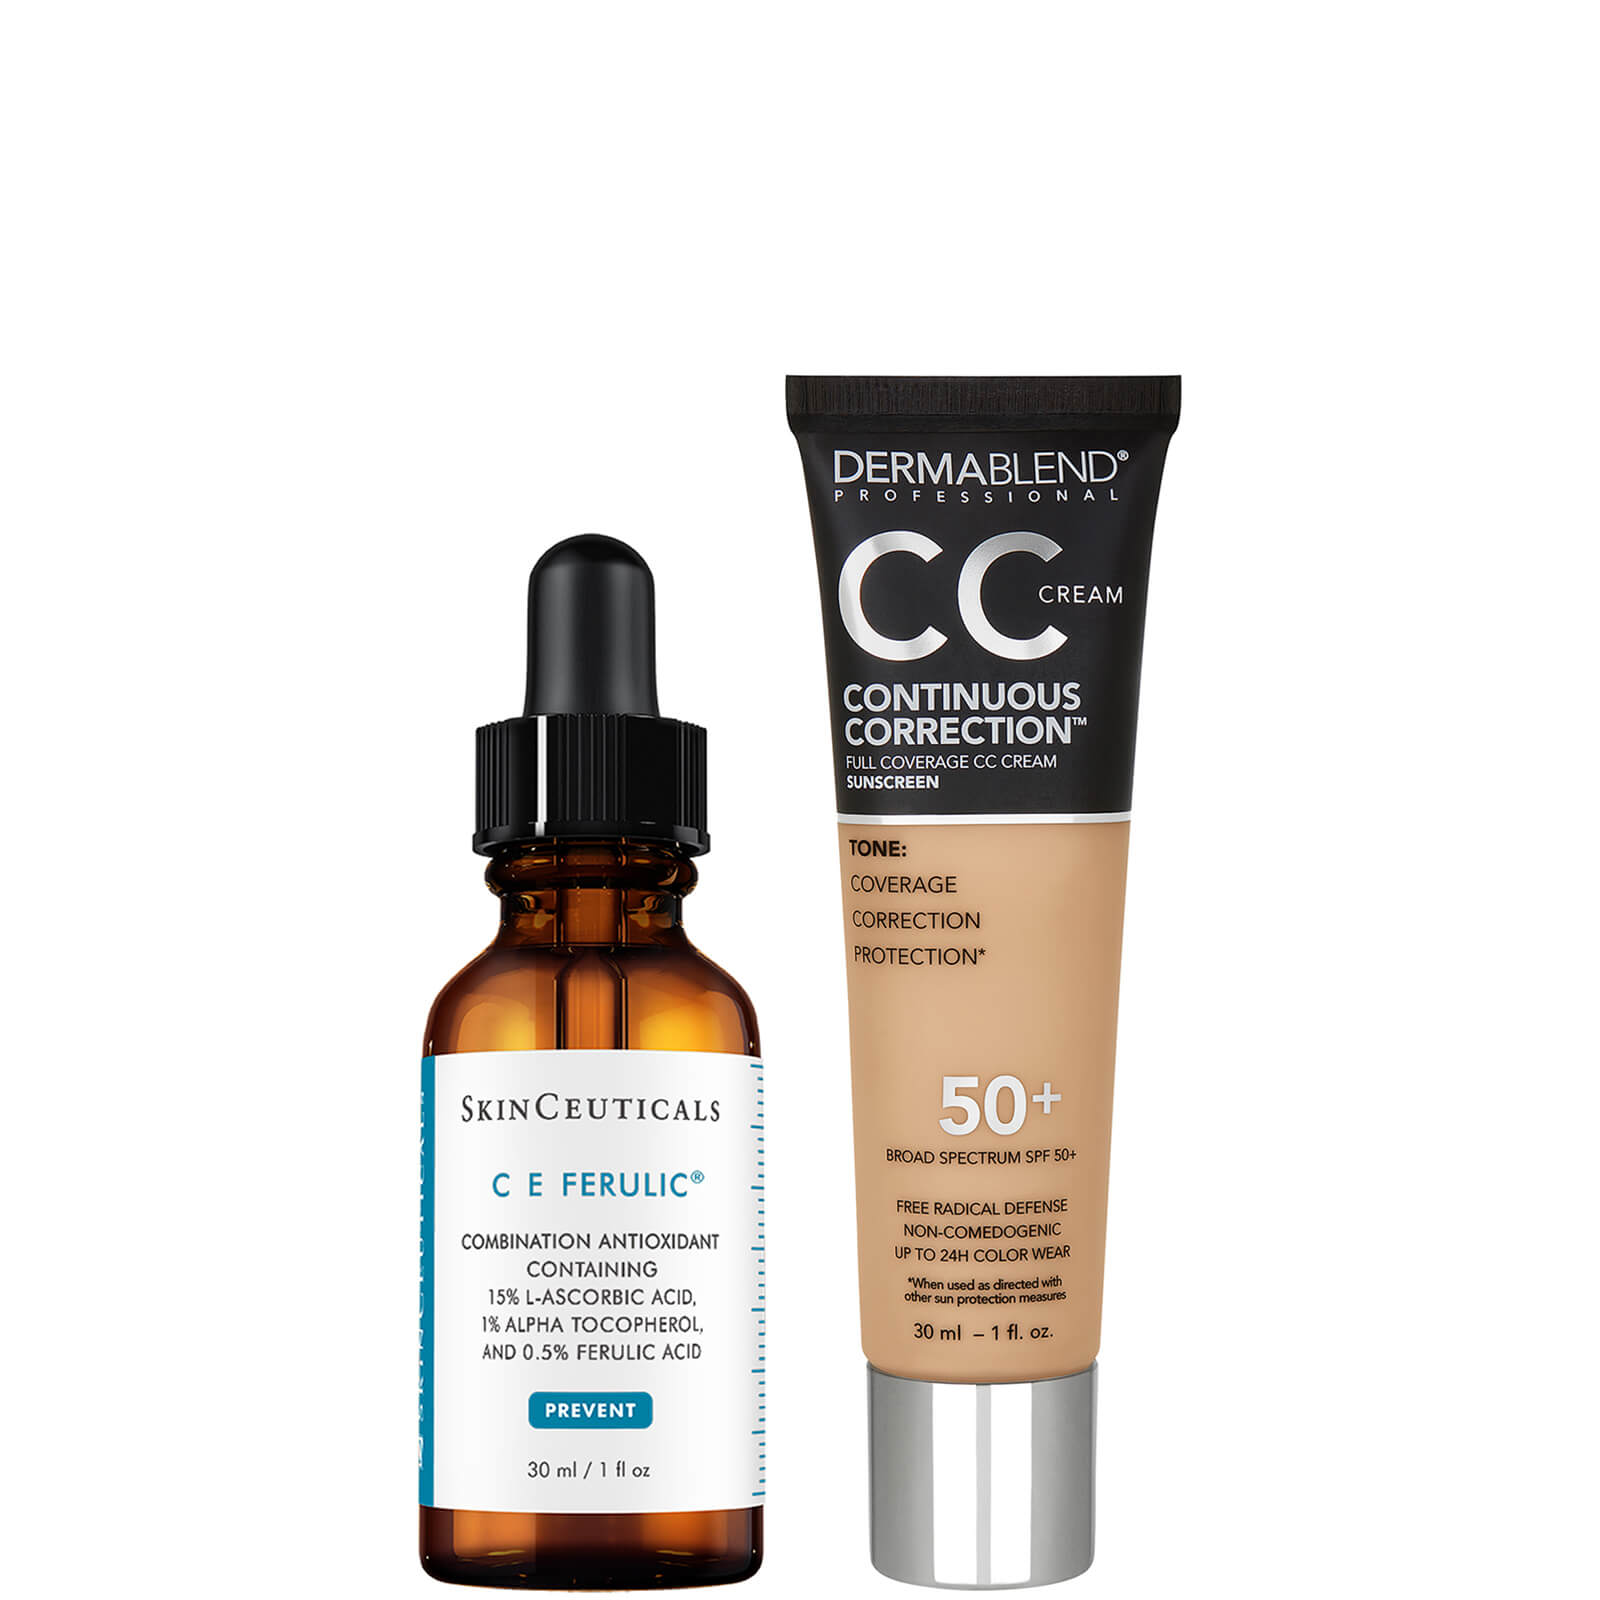 SkinCeuticals and Dermablend Anti-Aging Brightening Duo with Vitamin C and Niacinamide (Various Shades) ($223 Value) - 40N Medium 2